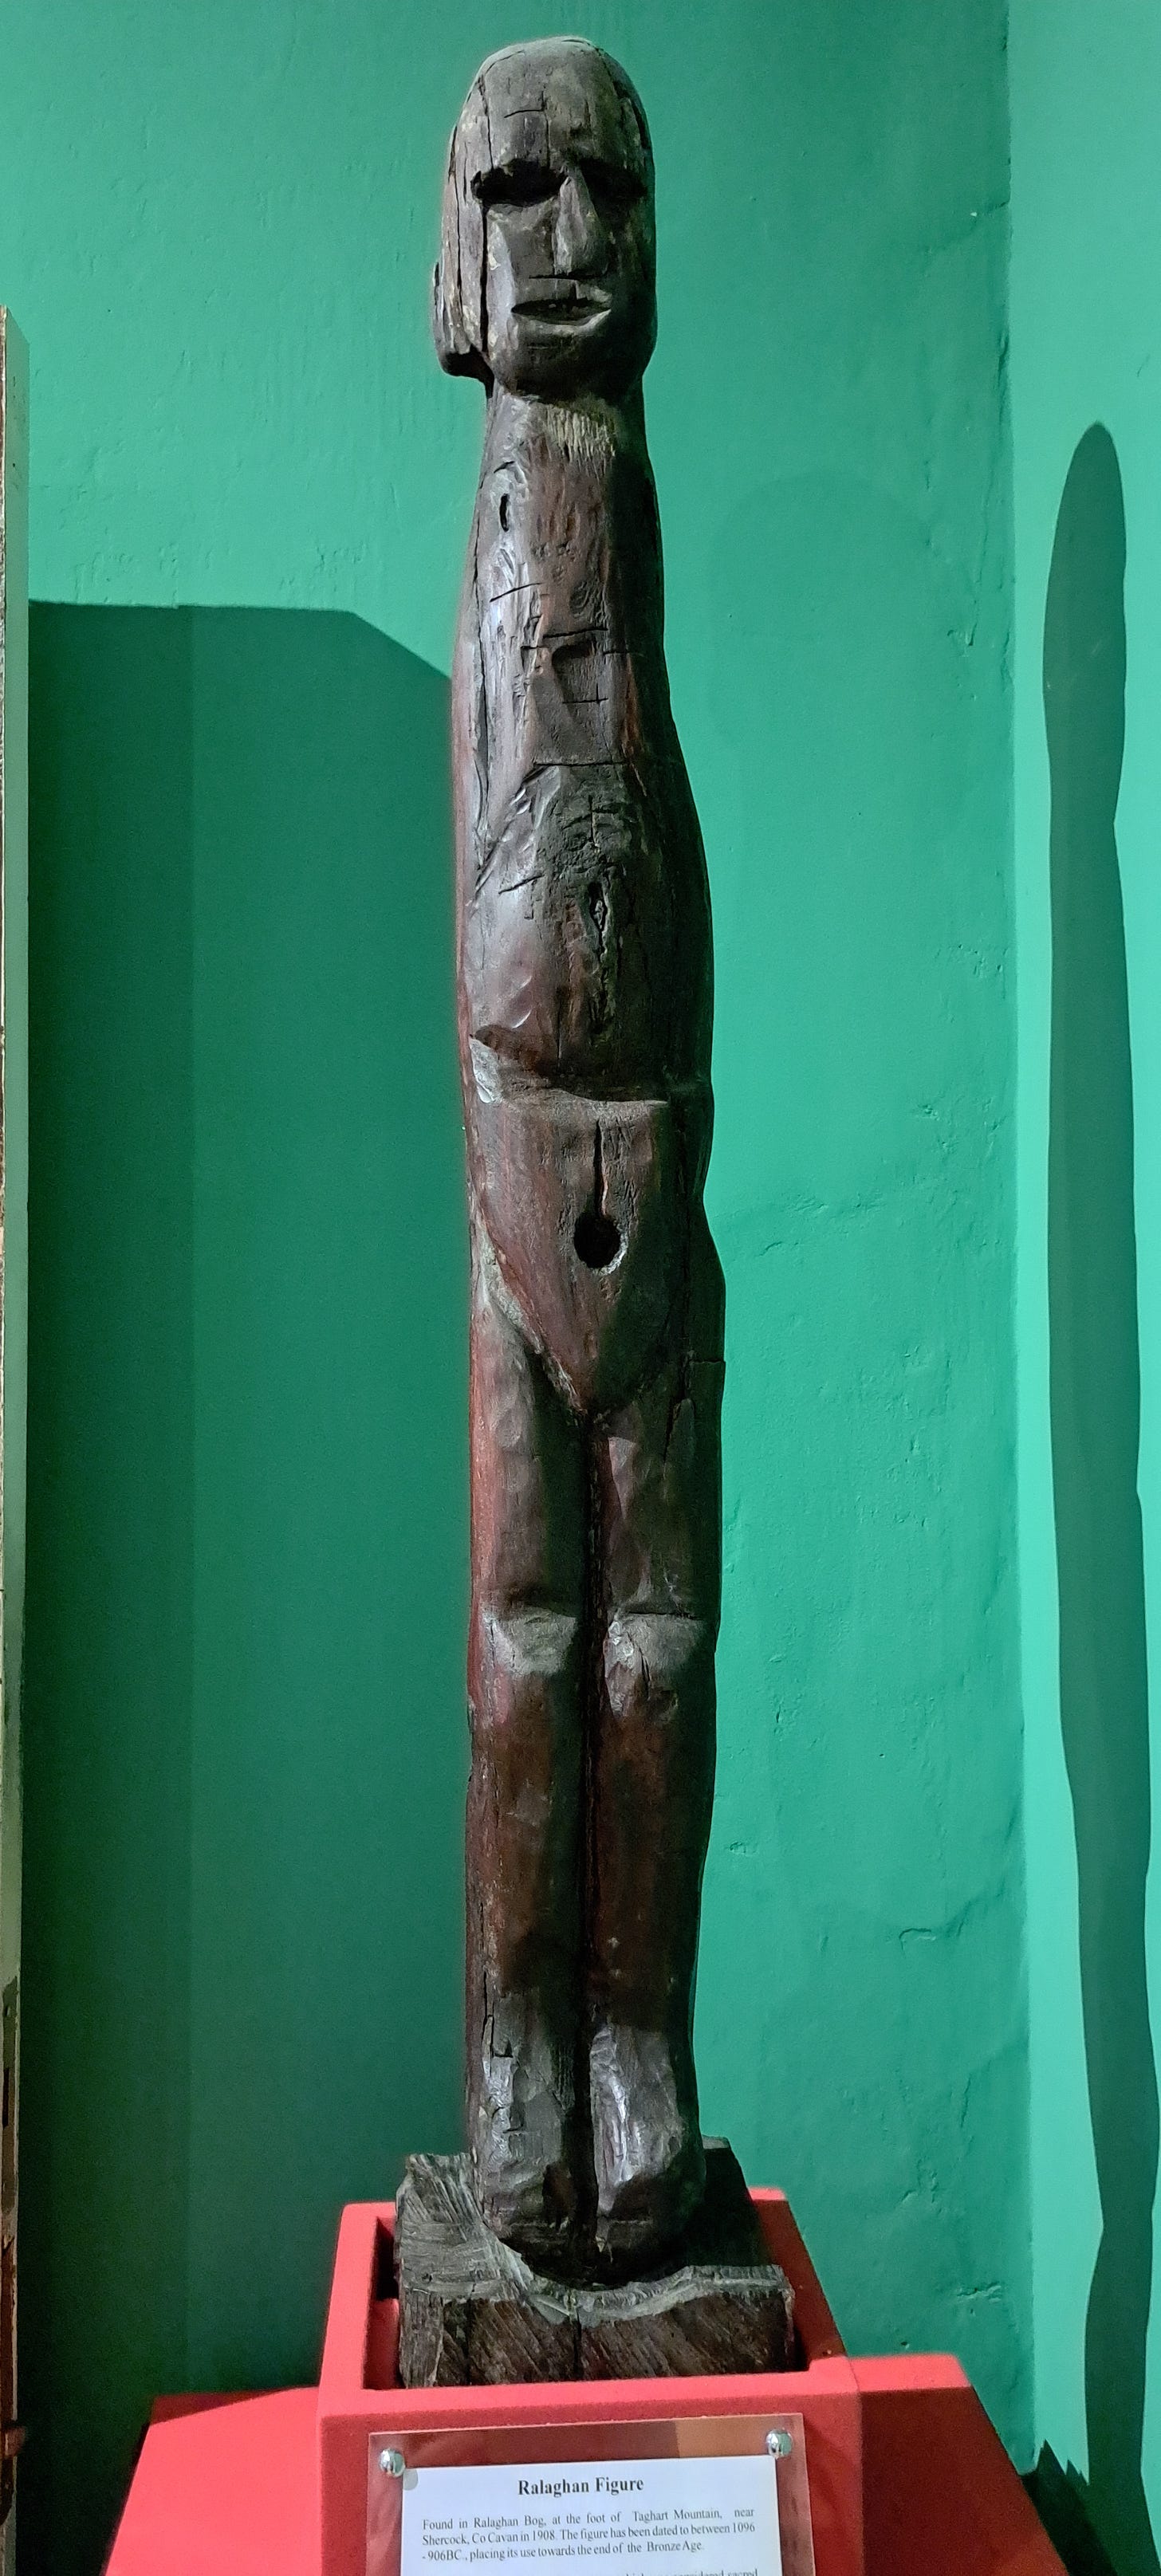 A tall narrow human figure carved from dark wood set on a red plinth and located against a deep green wall. This enigmatic carving is very roughly hewn with only the barest suggestion of arms, but its most significant feature is the round hole in the pelvic area.